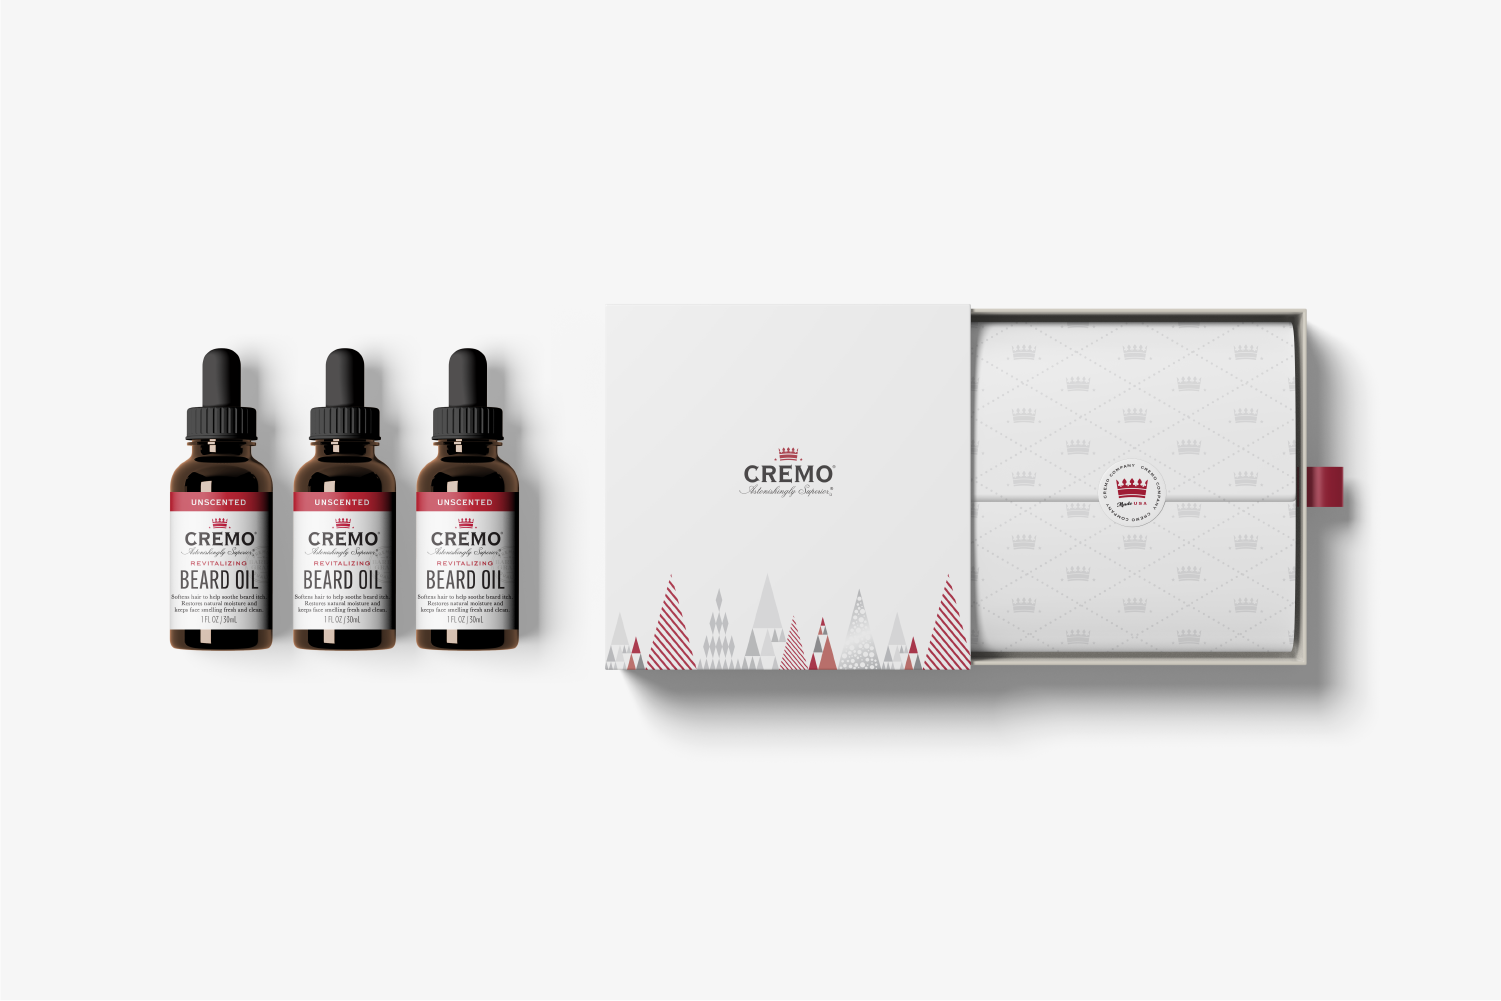 Cremo Holiday Gift Packaging and Uunscented Beard Oil